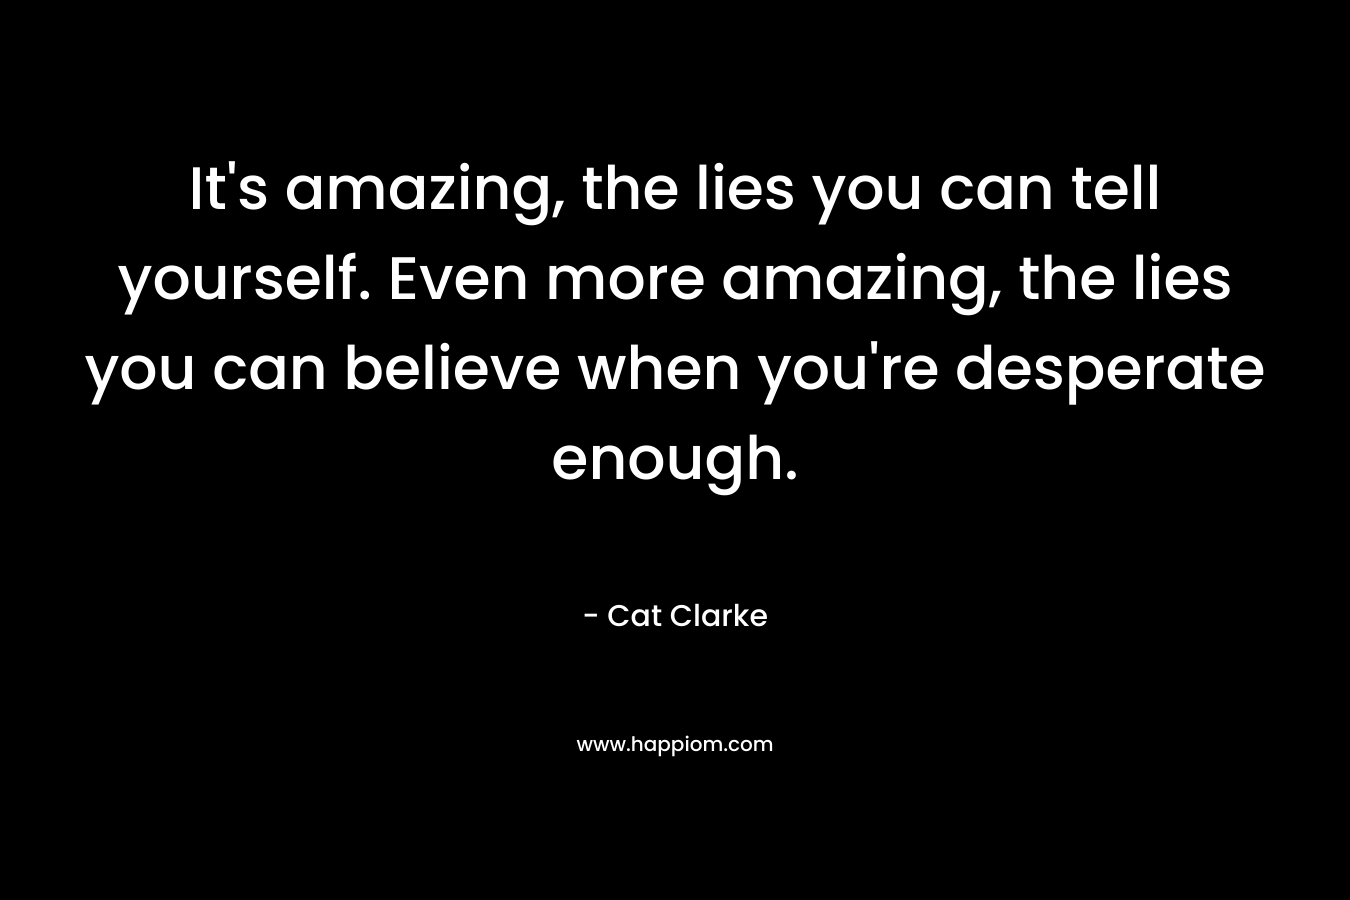 It's amazing, the lies you can tell yourself. Even more amazing, the lies you can believe when you're desperate enough.